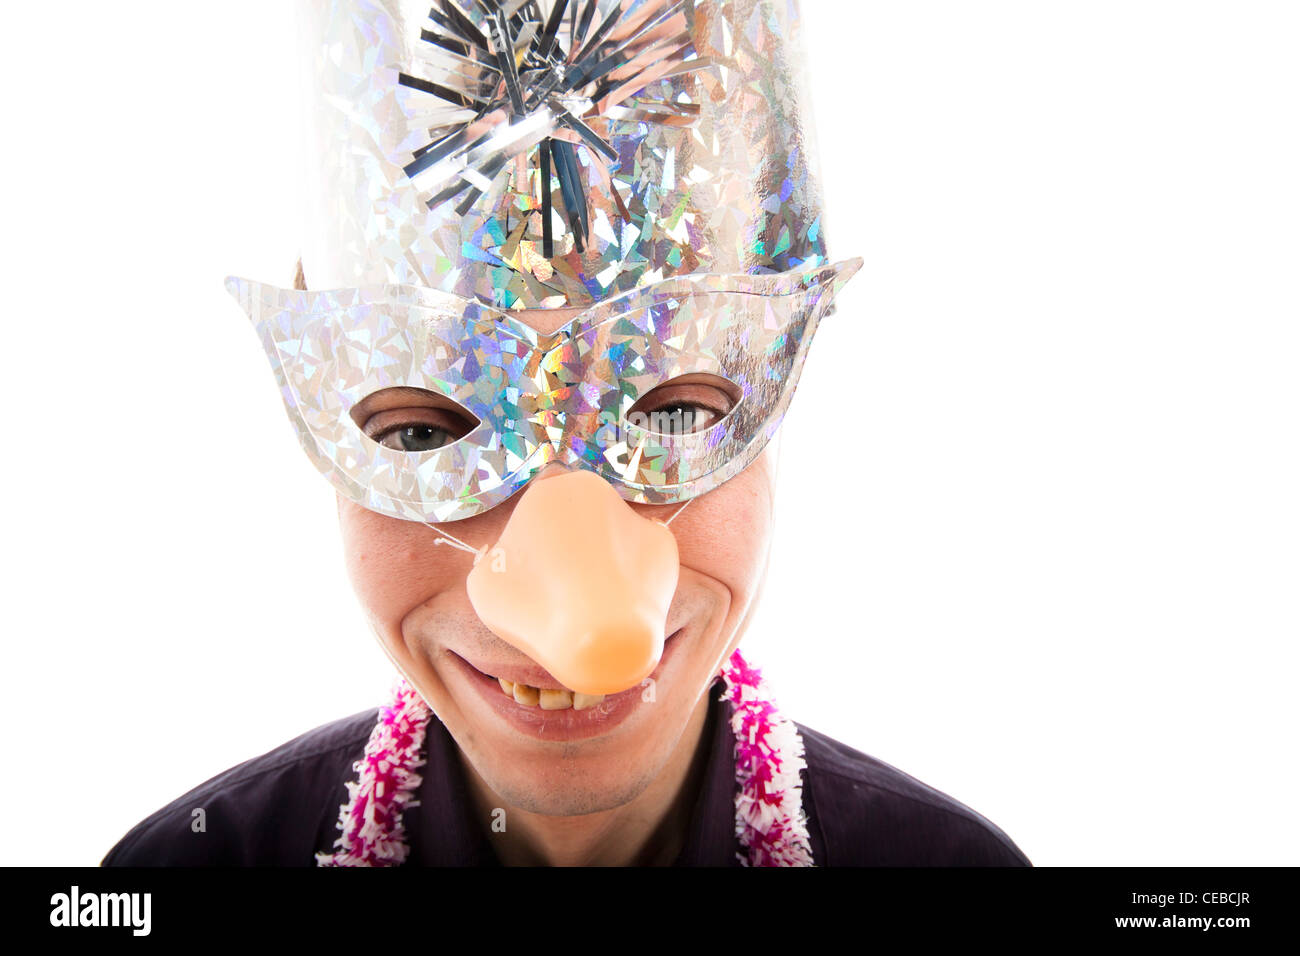 Funny ugly man wearing party mask smiling, isolated on white background. Stock Photo